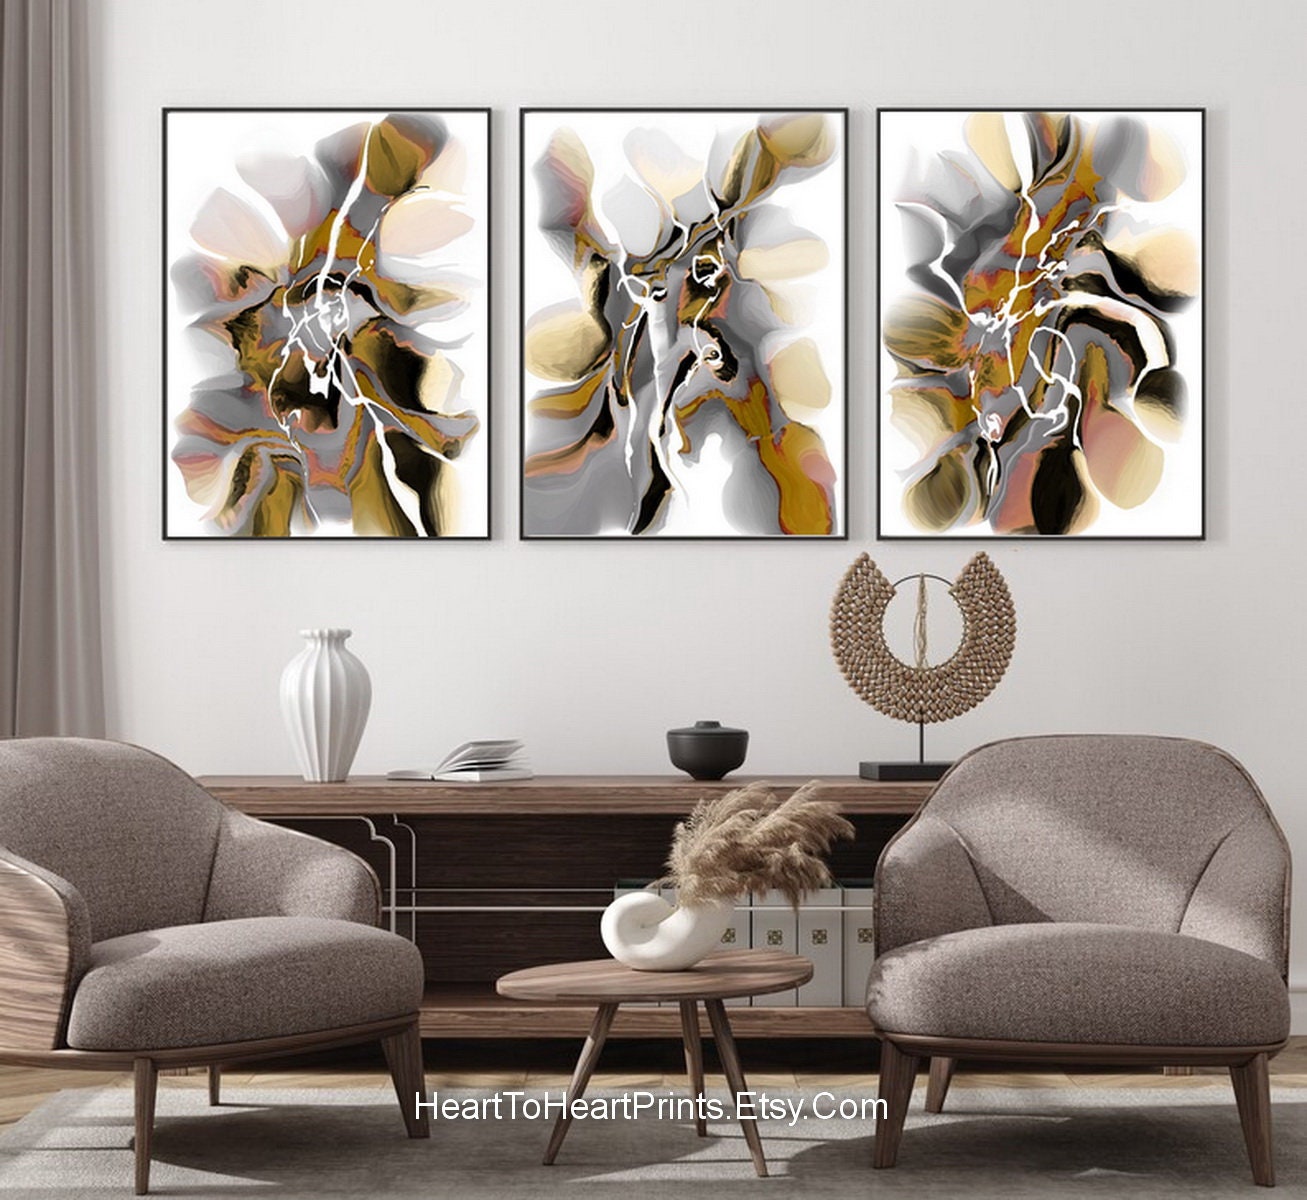 Earth Tone Abstract Painting PRINTABLE Wall Art 24x36 Neutral - Etsy